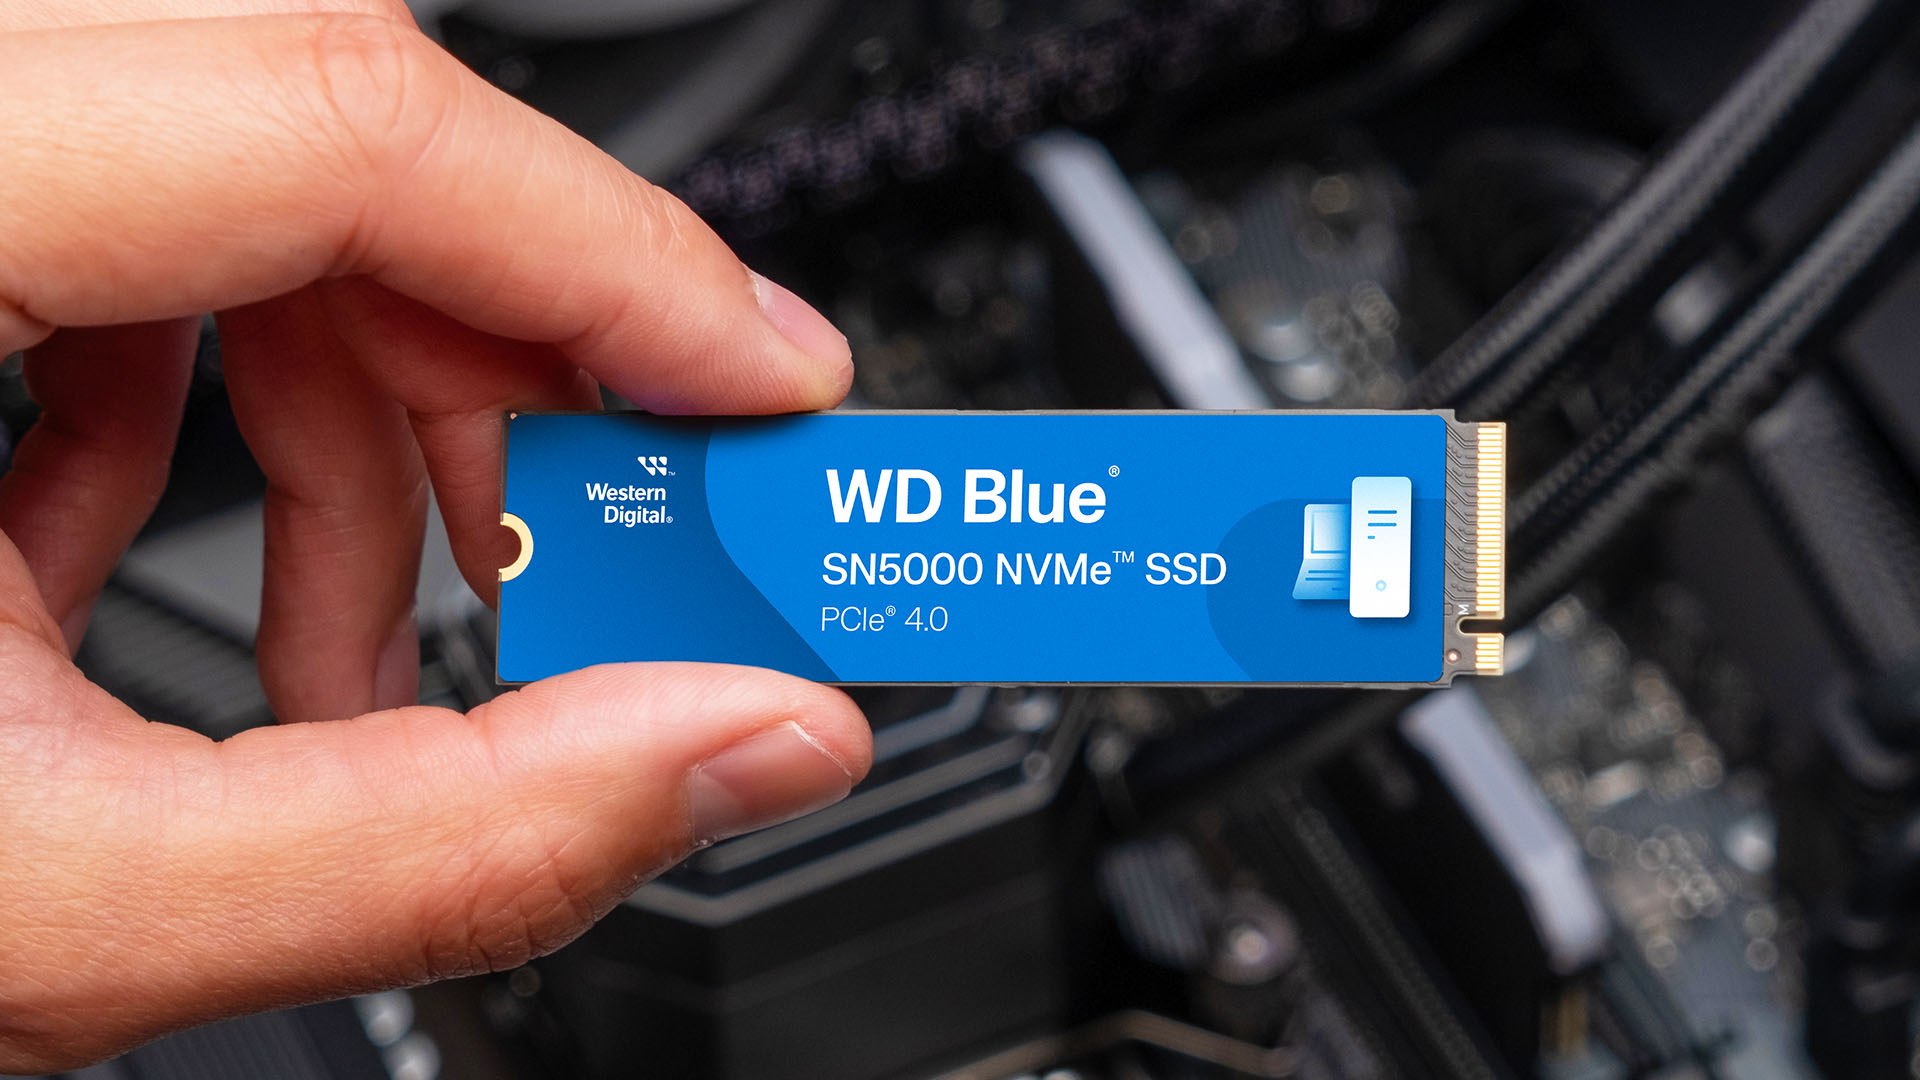 WD's new 4TB SSD has a shocking price, and we're all for it